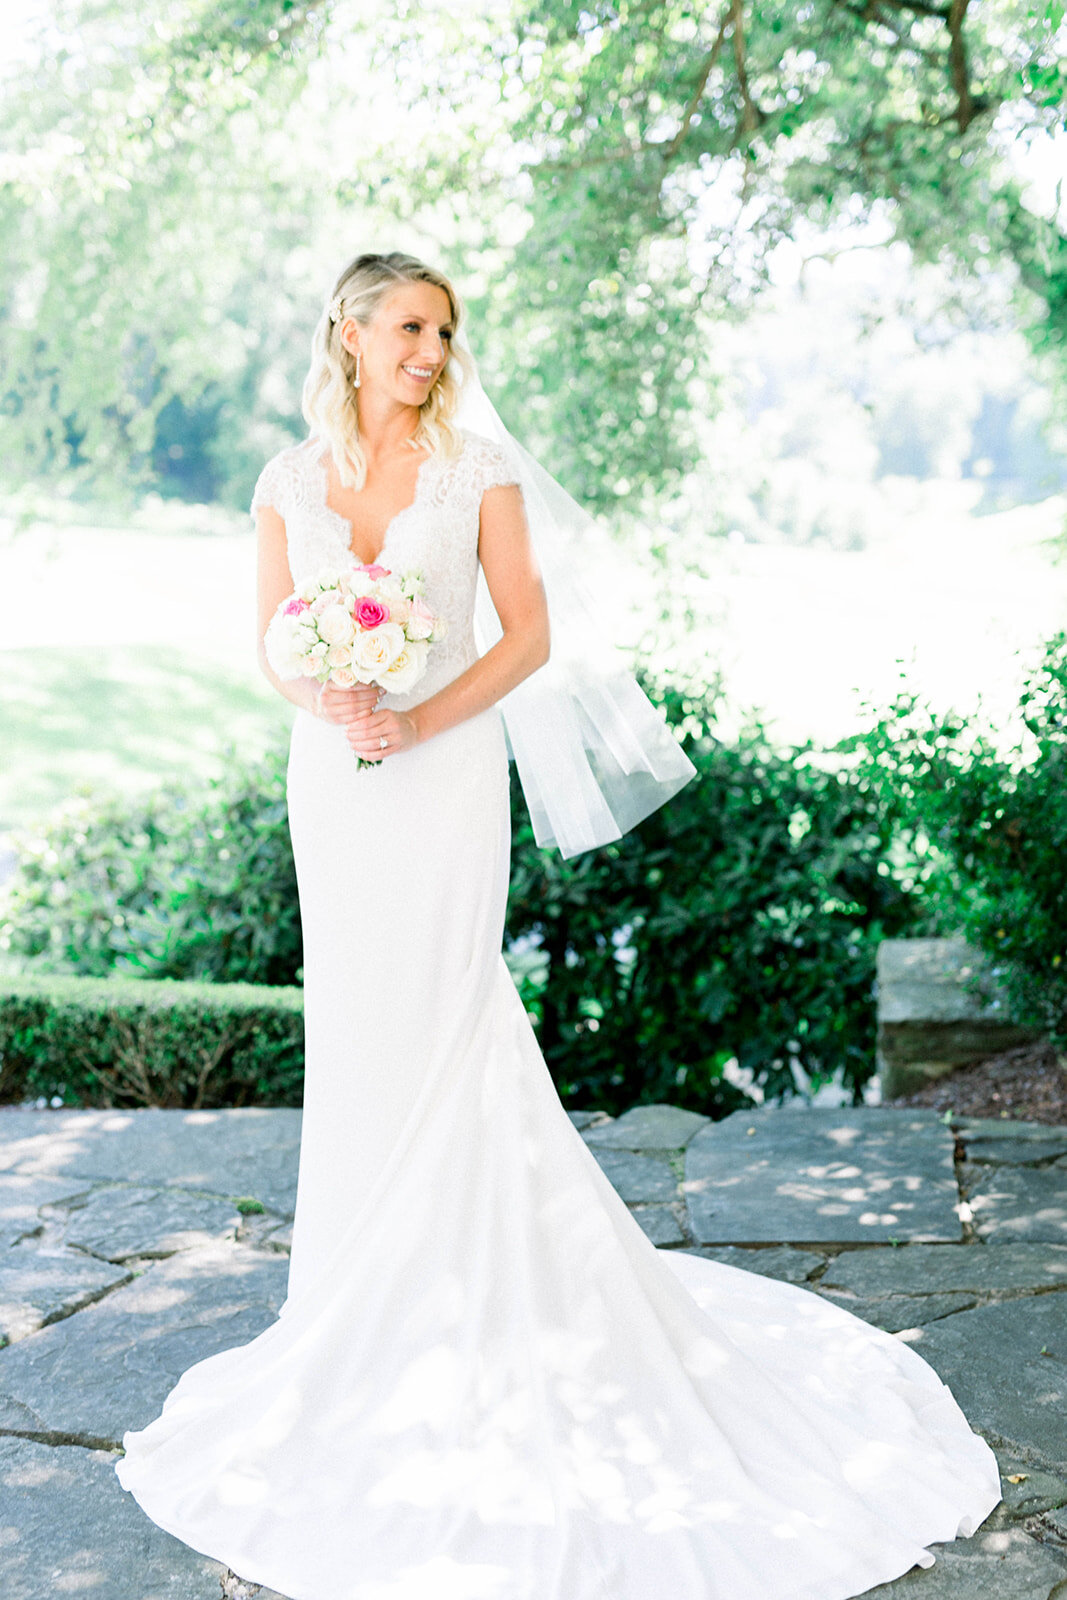 Lace wedding dress: Longue Vue Club Wedding captured by Abbie Tyler Photography